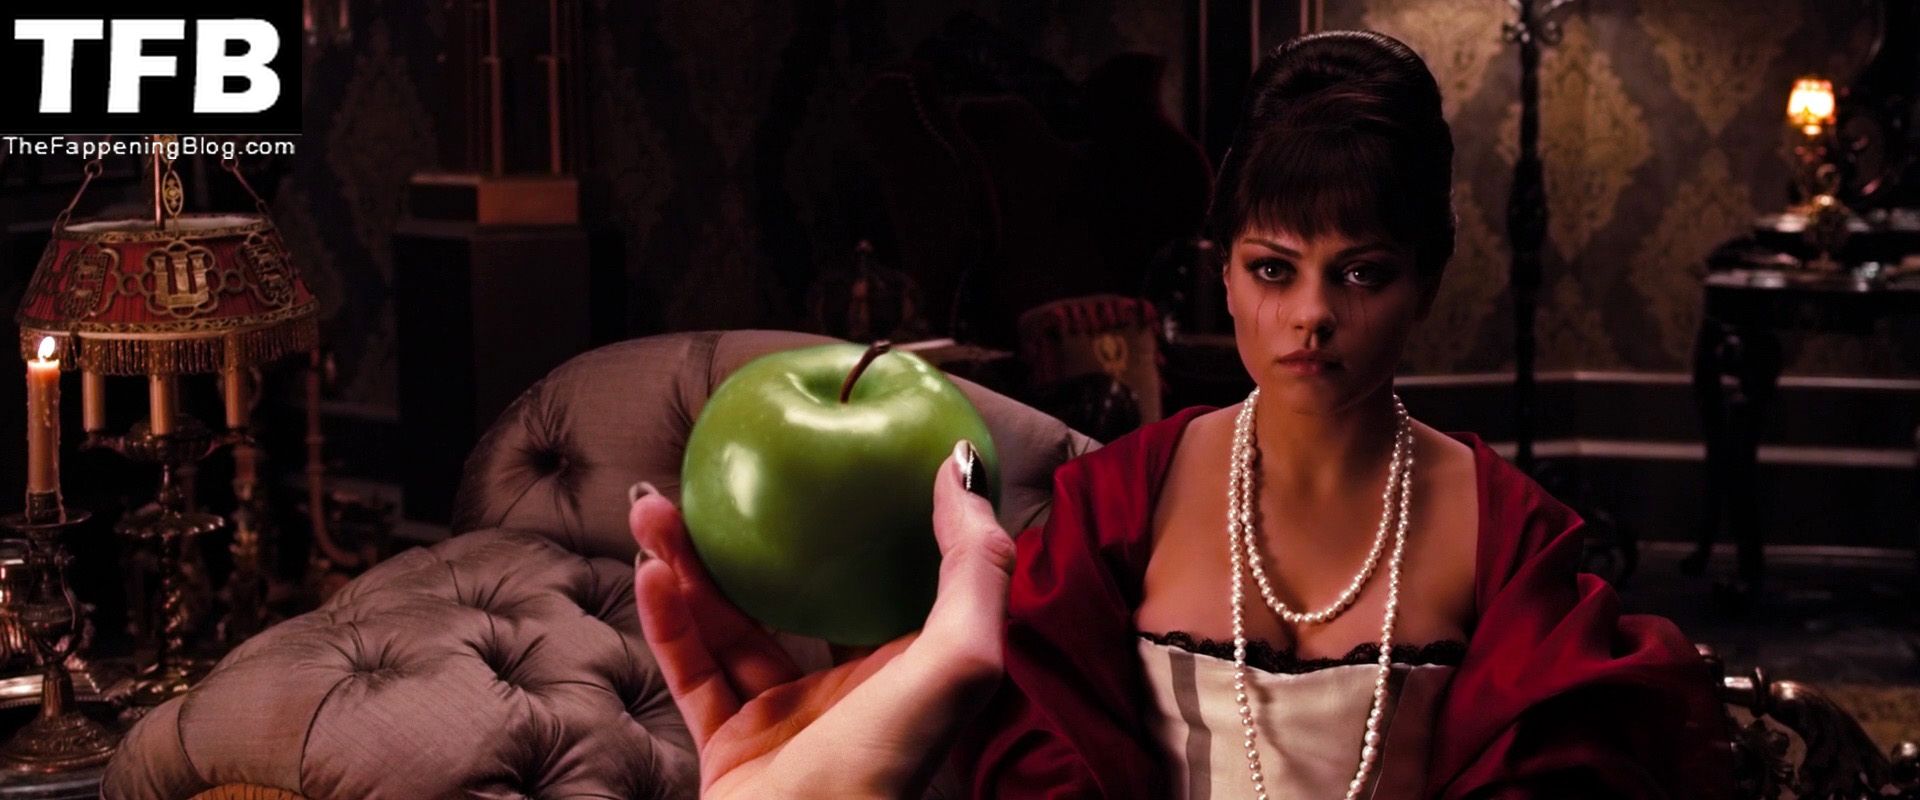 Mila-Kunis-Sexy-–-Oz-the-Great-and-Powerful-1-thefappeningblog.com_.jpg